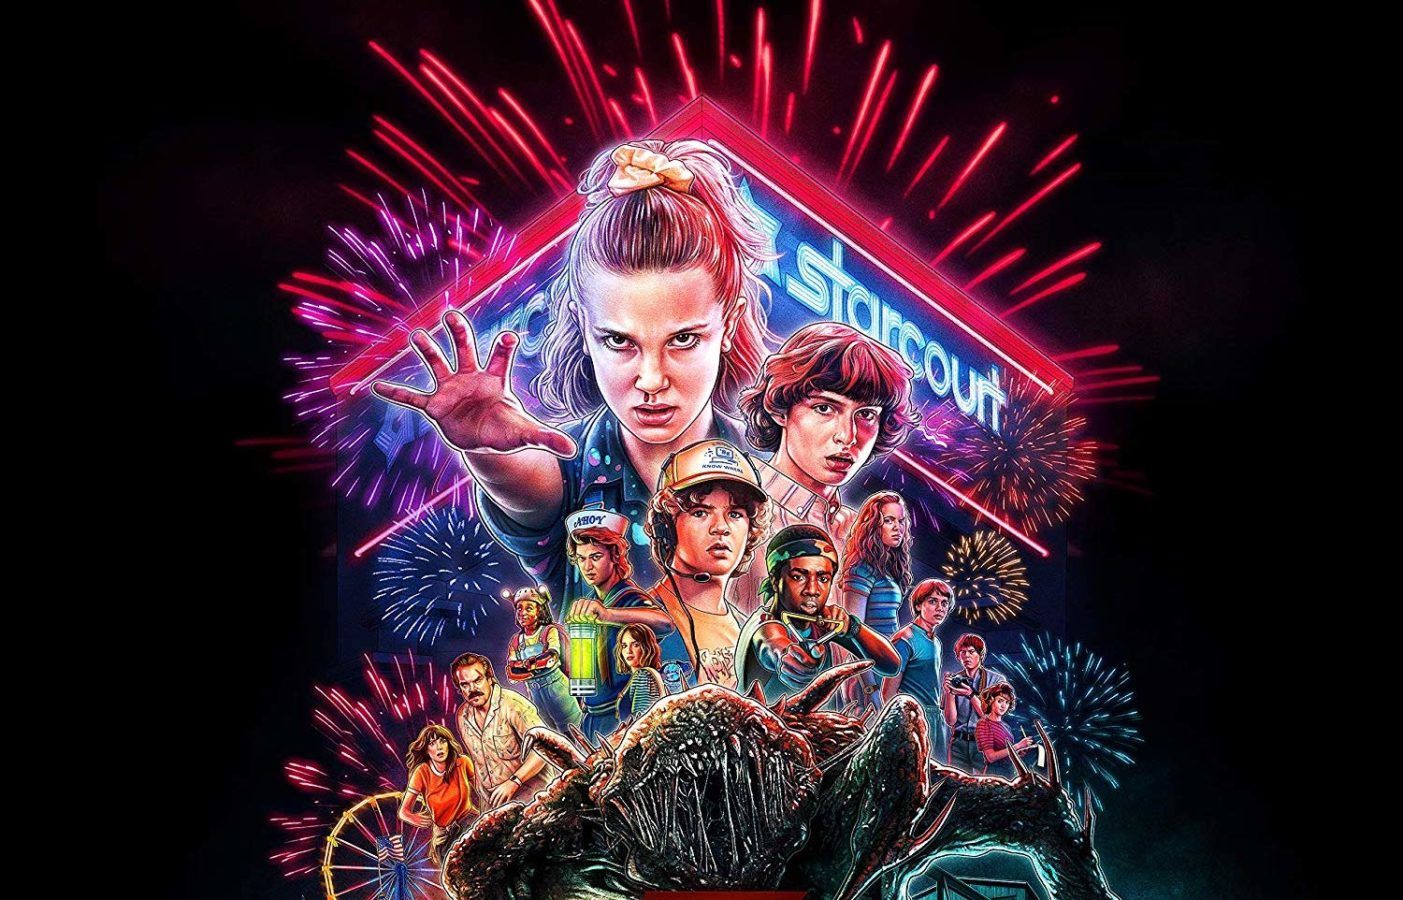 Netflix launches mobile gaming with two Stranger Things titles for Android users